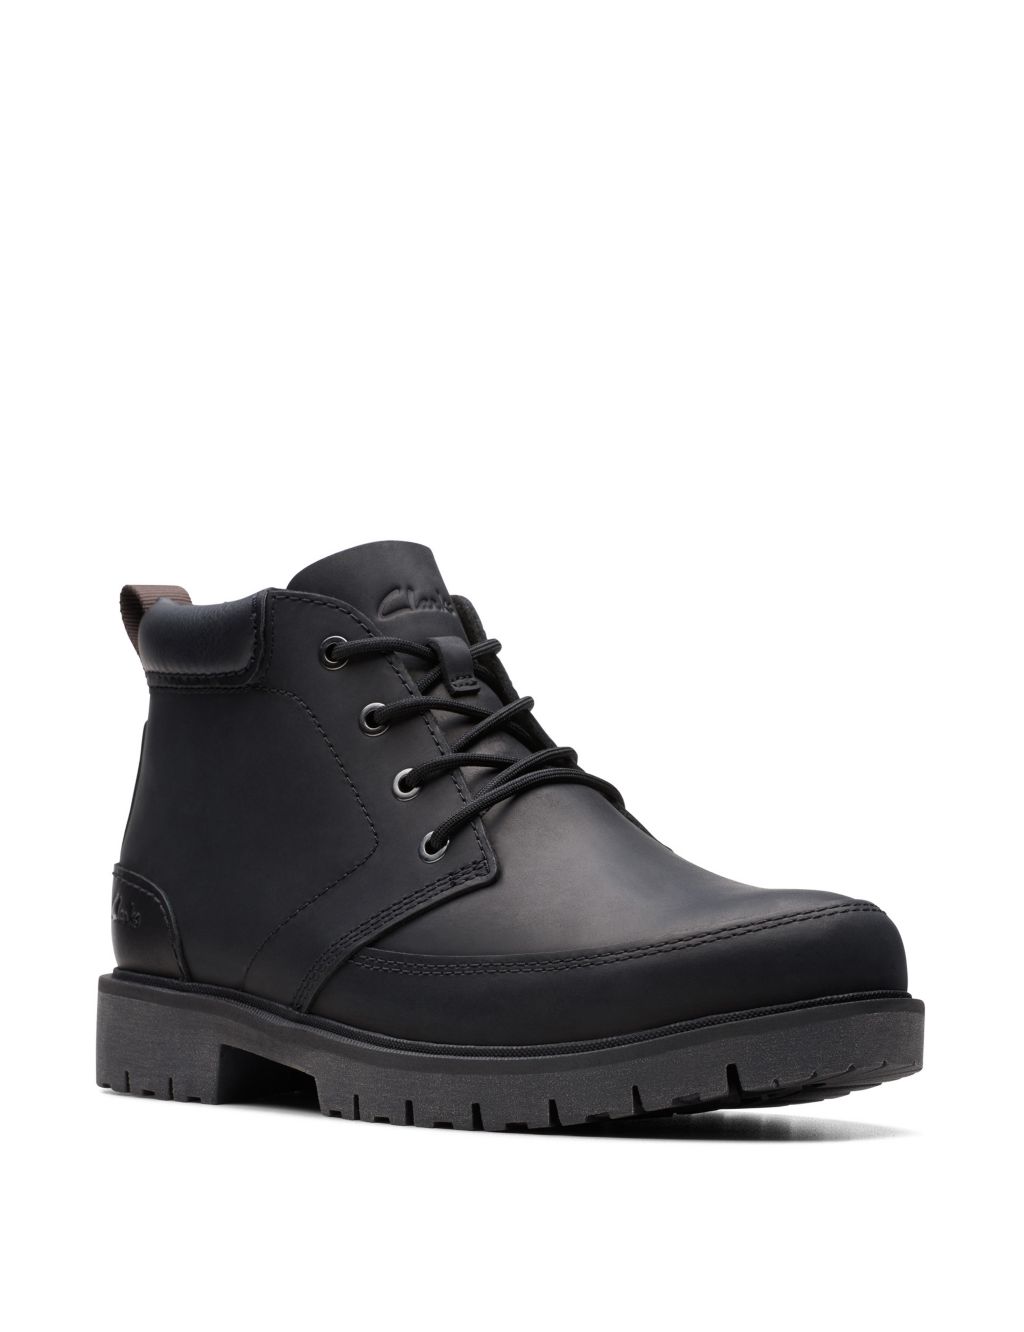 Leather Casual Boots image 2